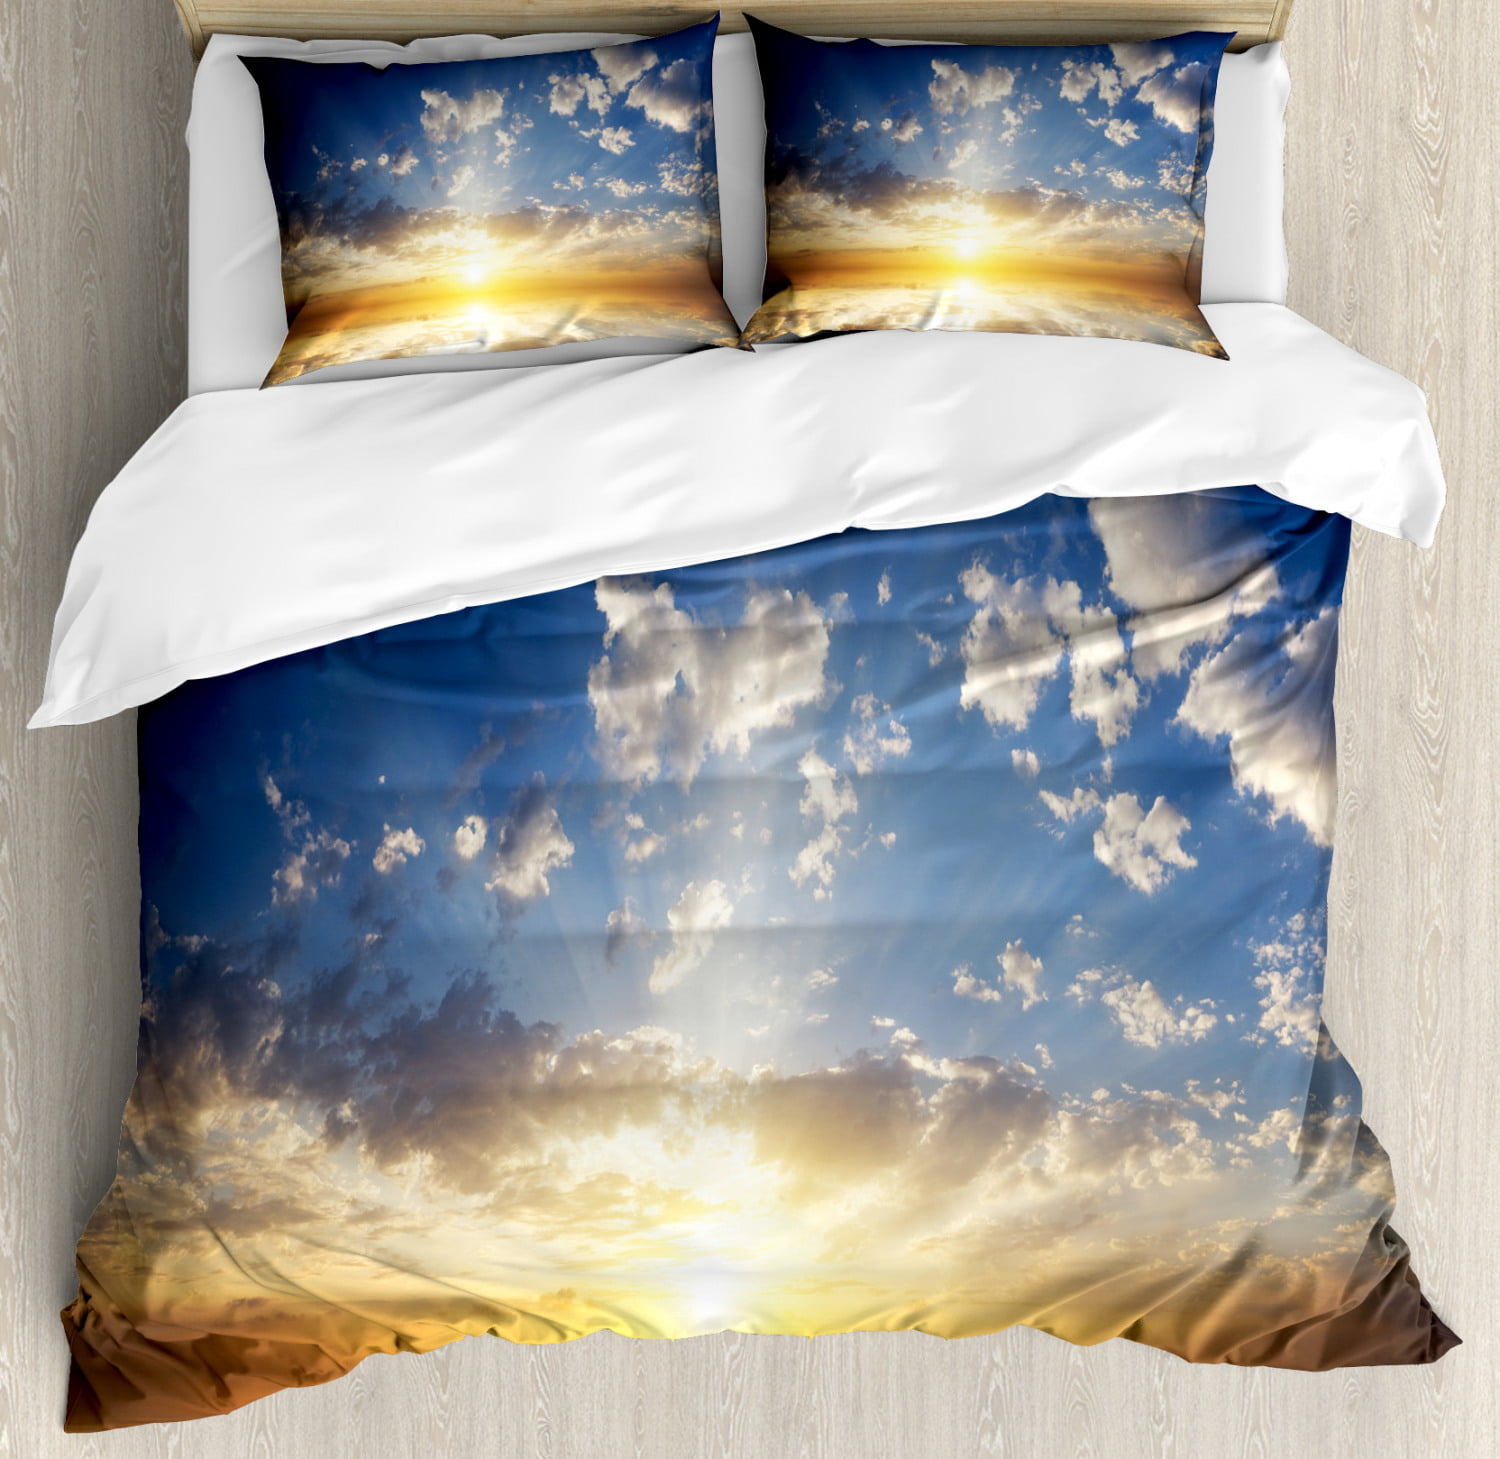 Details about   UFO Quilted Bedspread & Pillow Shams Set Night Scenery Aliens Space Print 